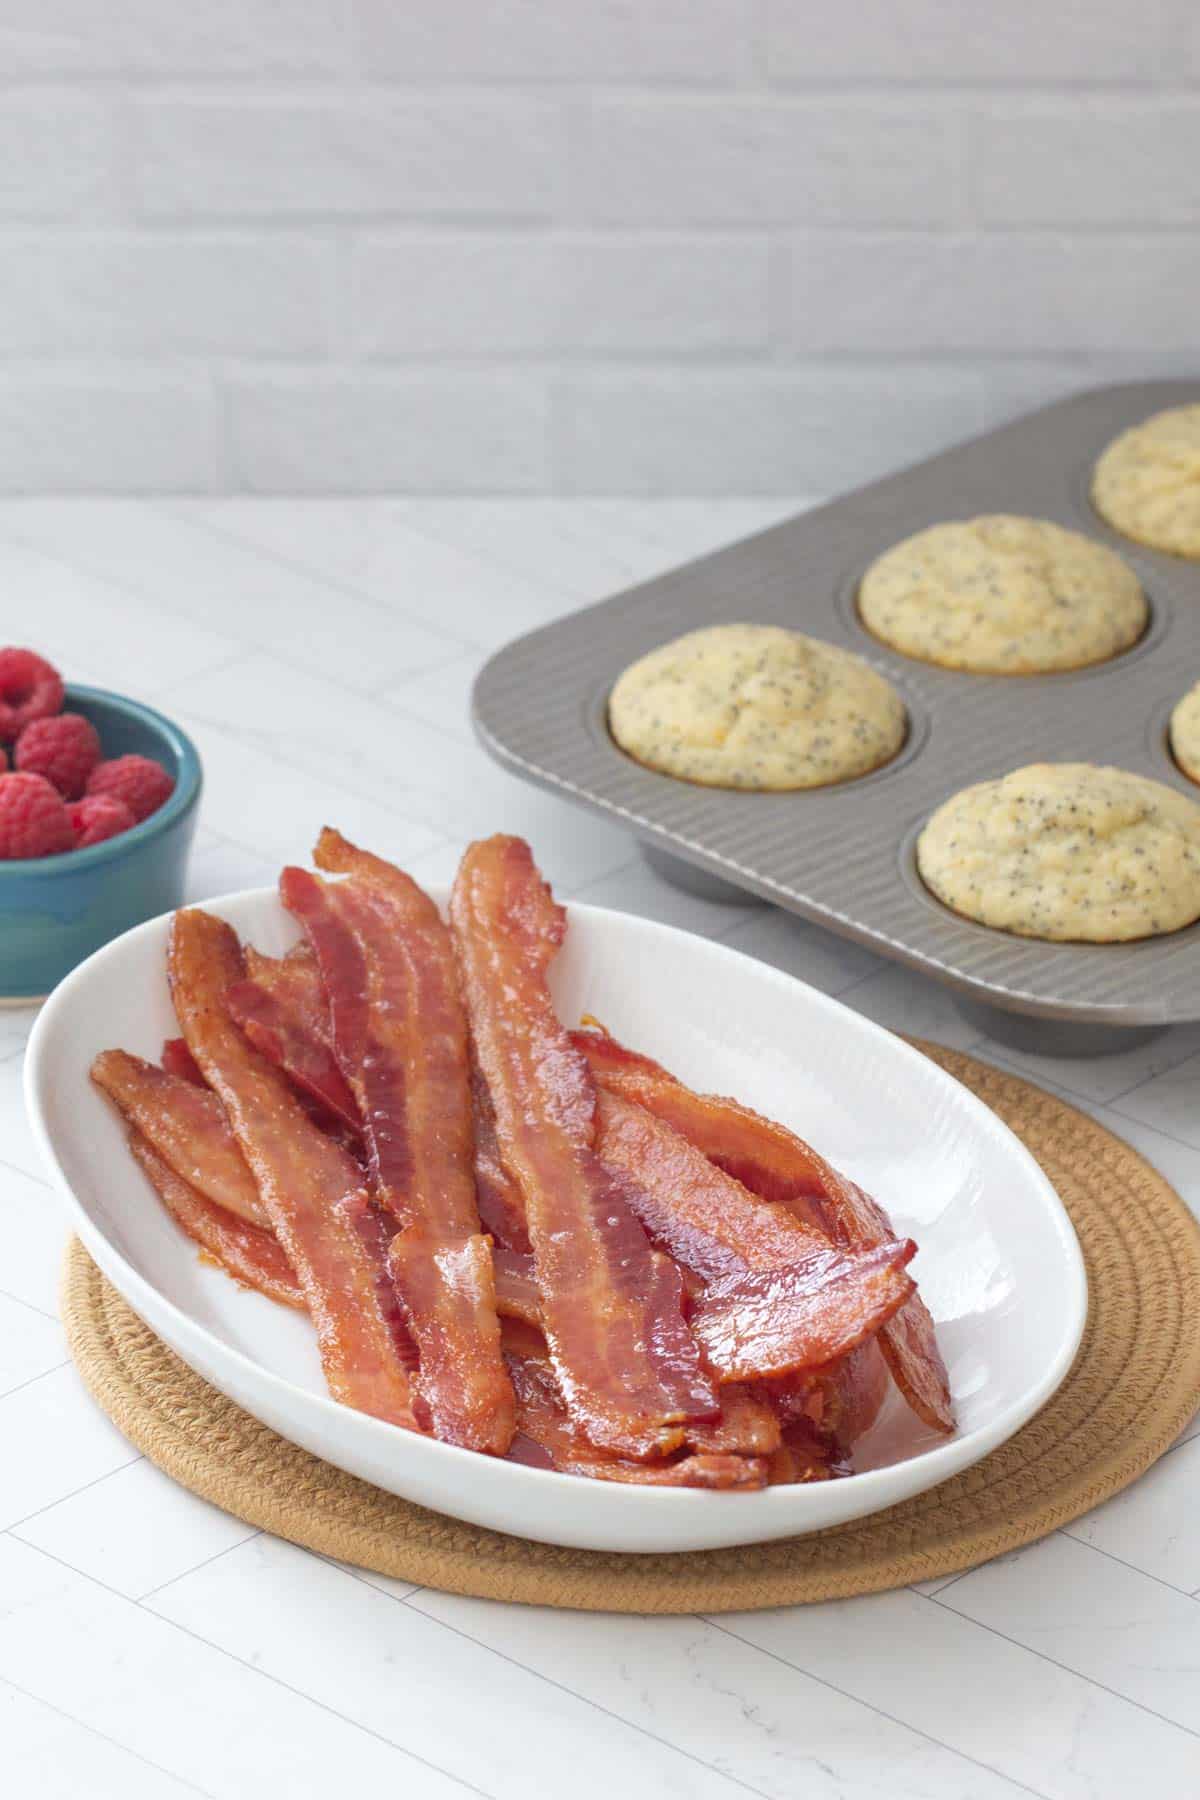 https://www.stetted.com/wp-content/uploads/2022/01/How-to-Bake-Bacon-Picture.jpg